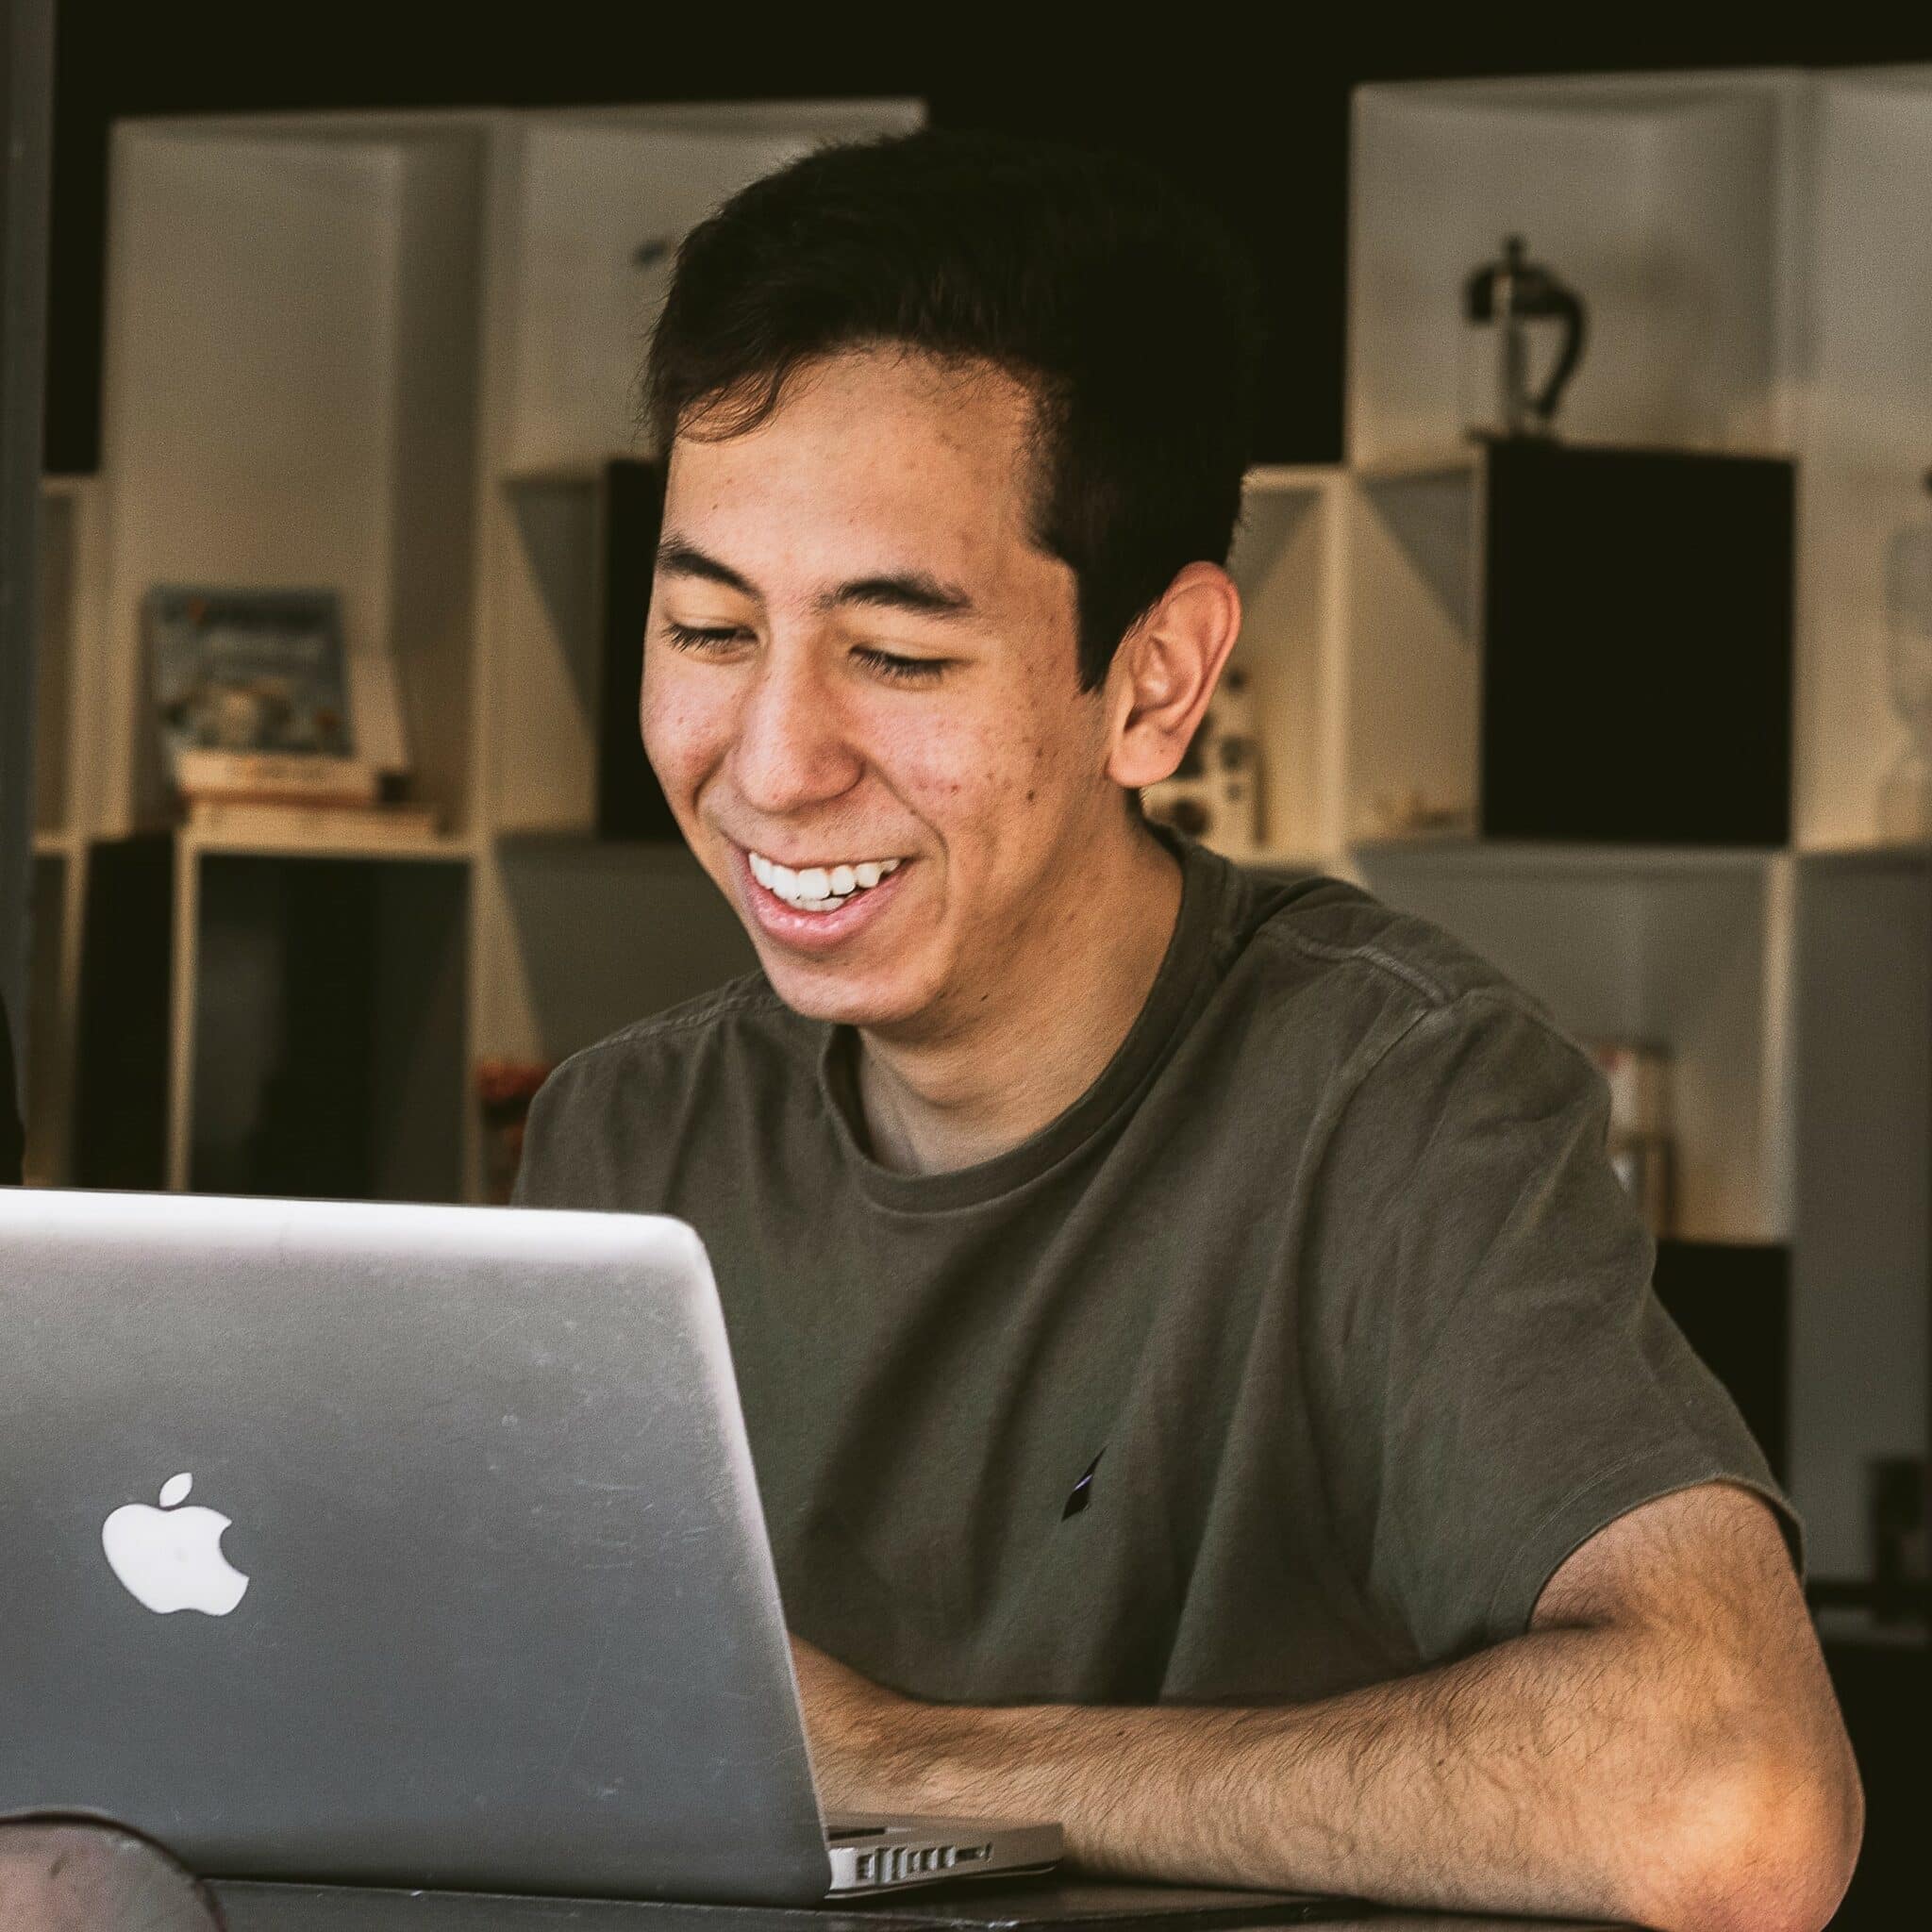 Young man with dark hair, wearing a t-shirt, smiling down at his Macbook laptop.